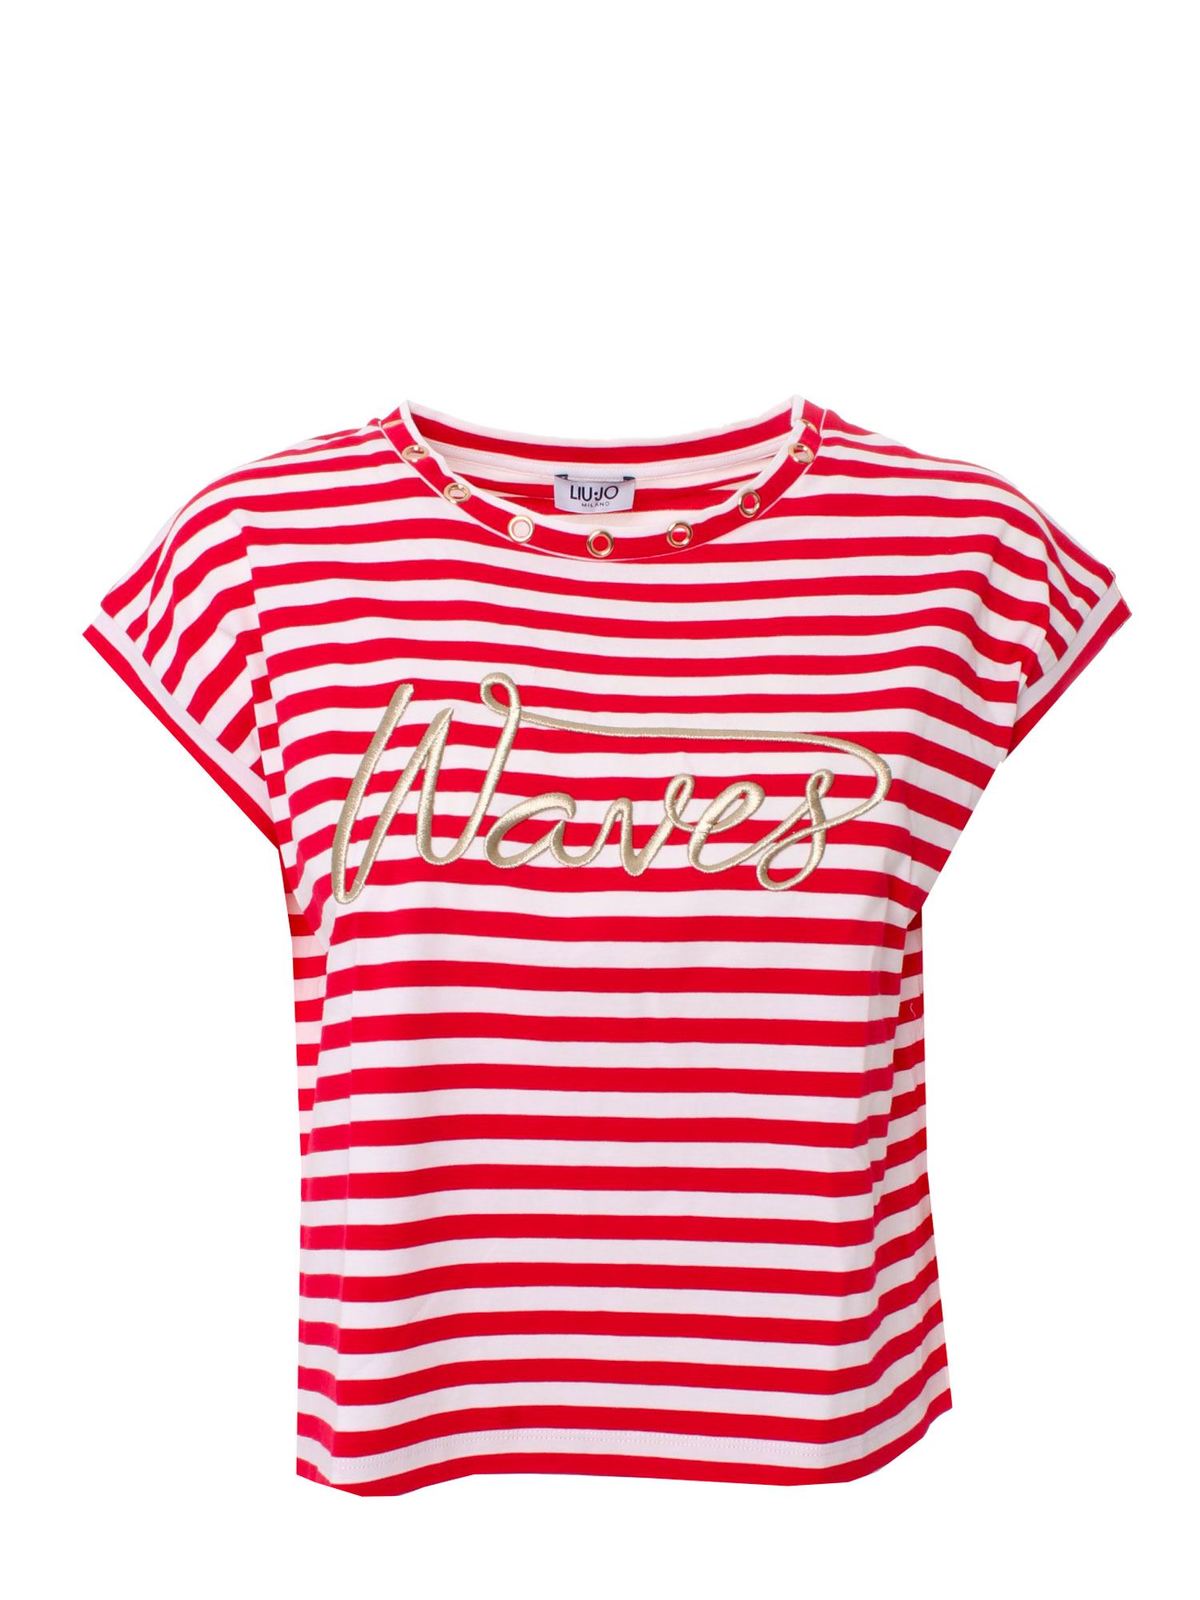 Liu •jo Cottons WAVES STRIPED T-SHIRT IN RED AND WHITE